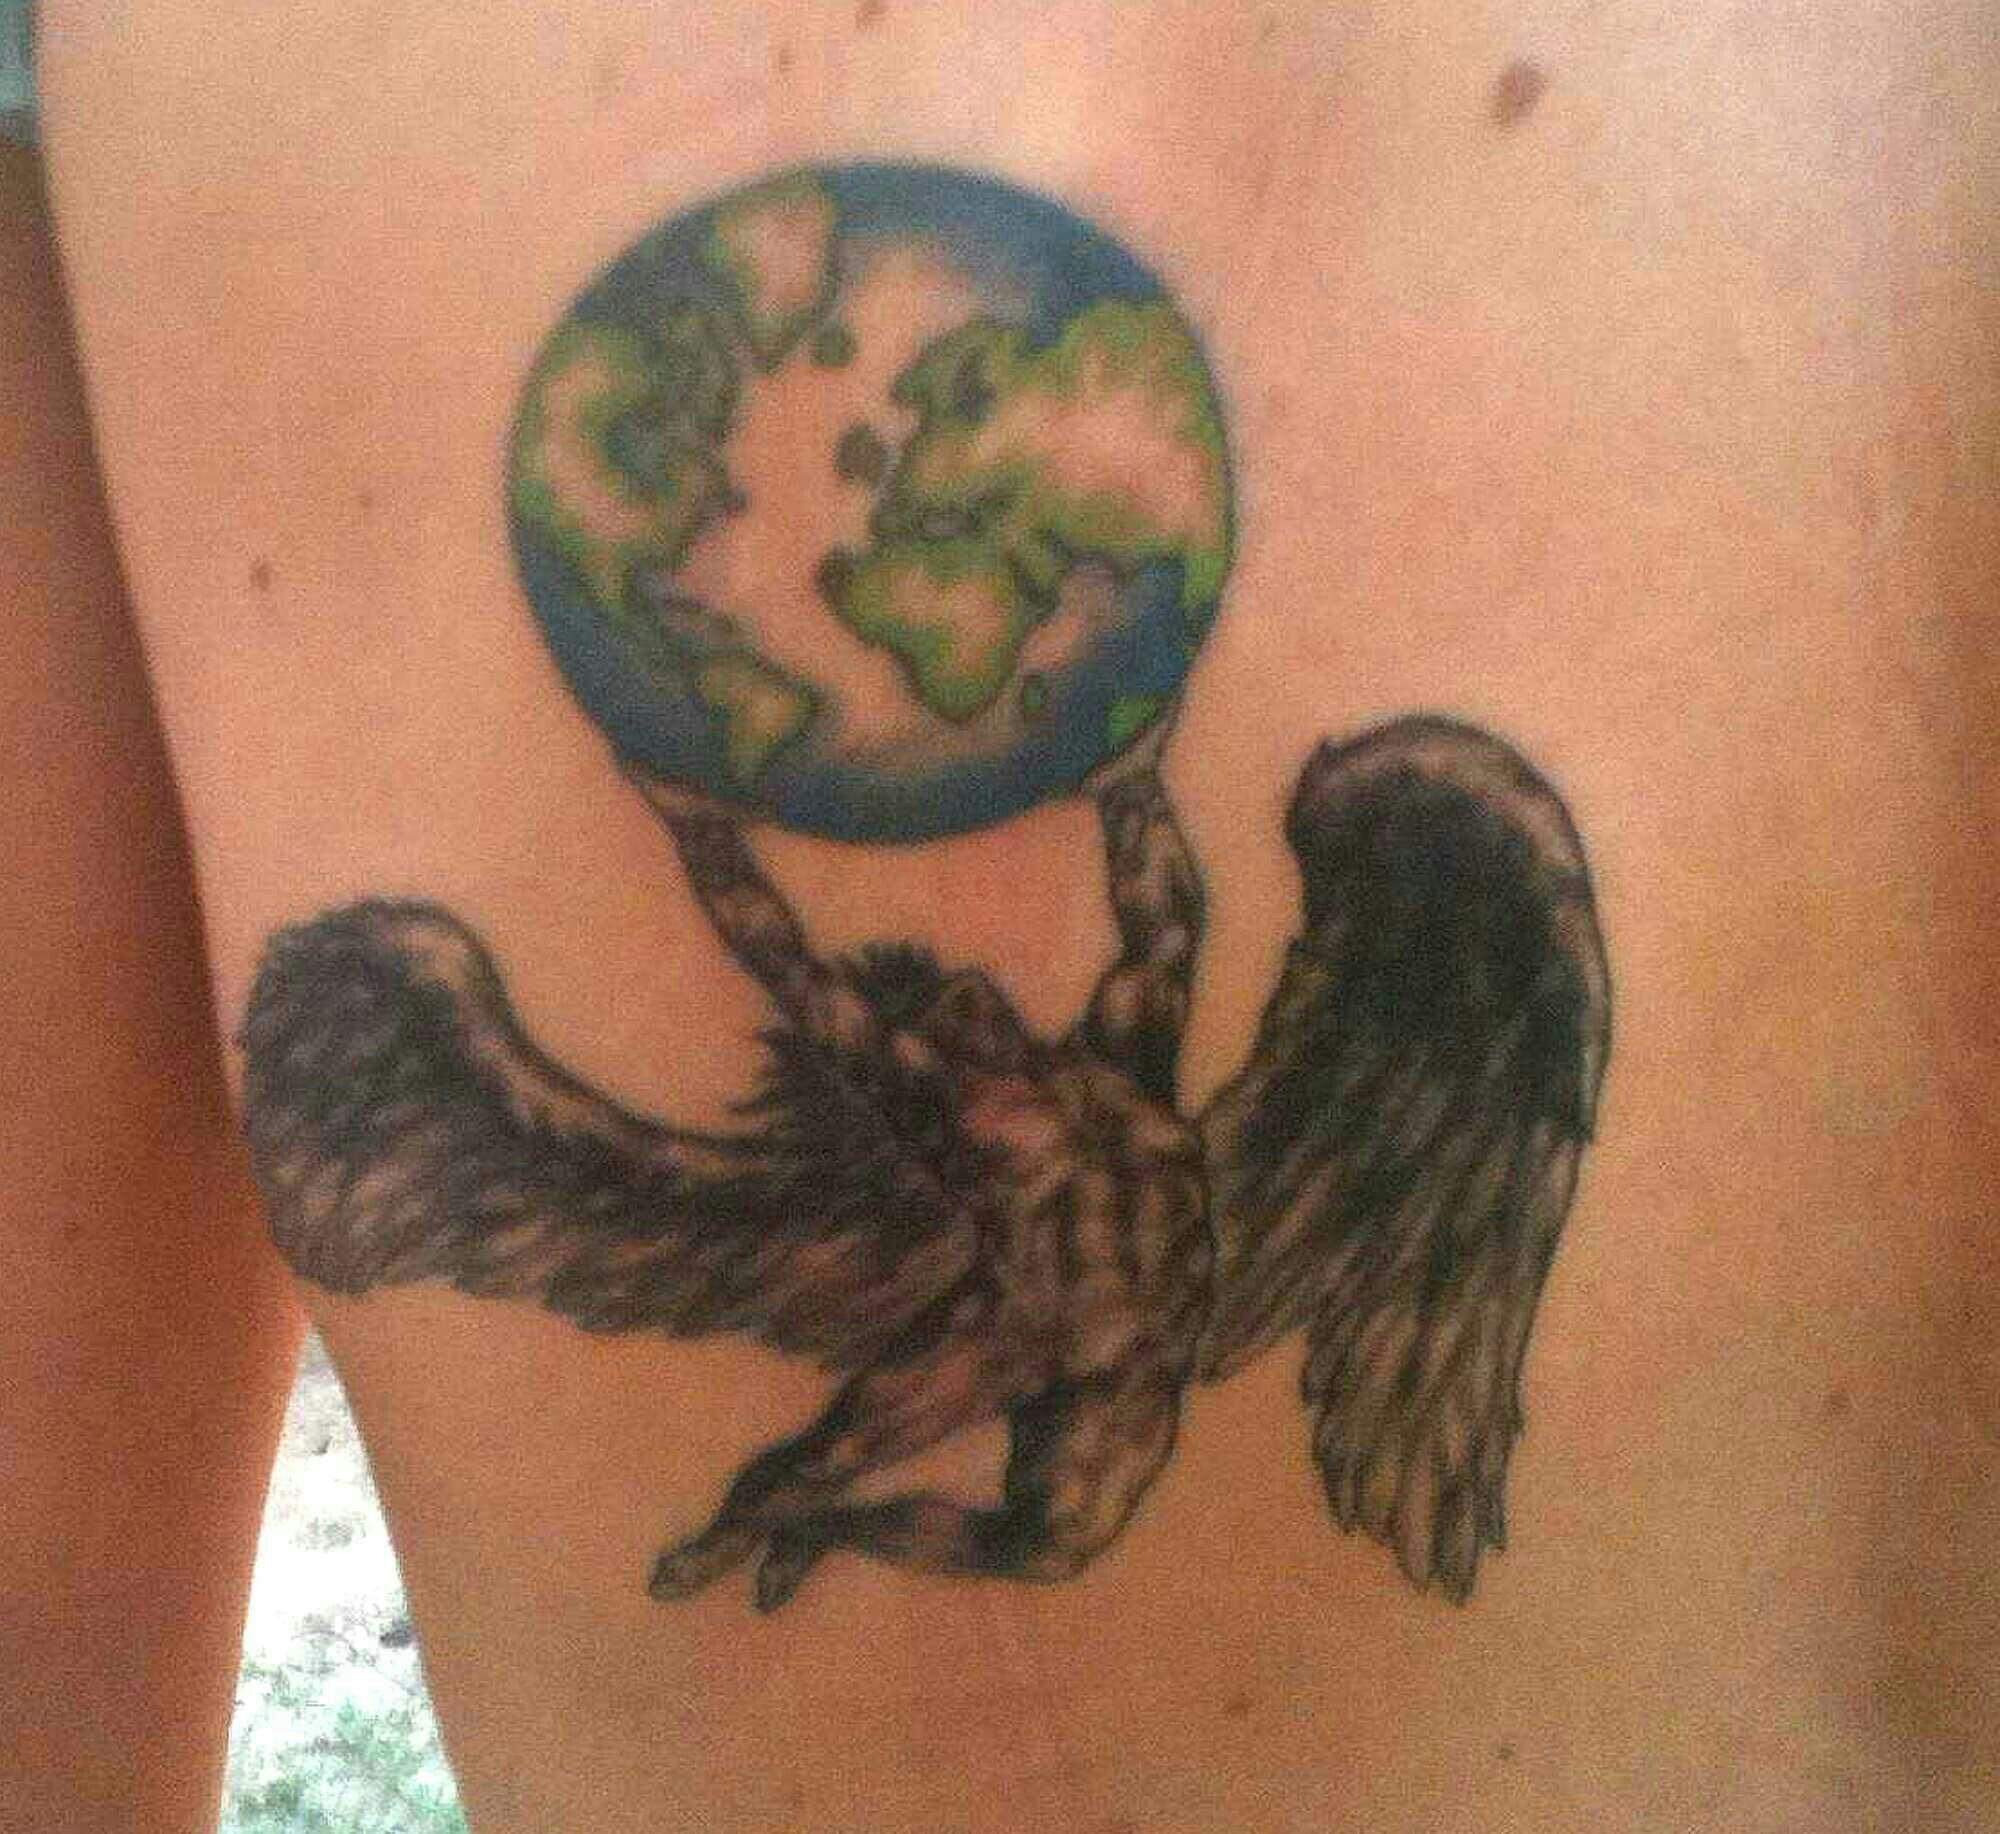 Led Zeppelin  Swan Song  by  IndianTattooVerona  Facebook